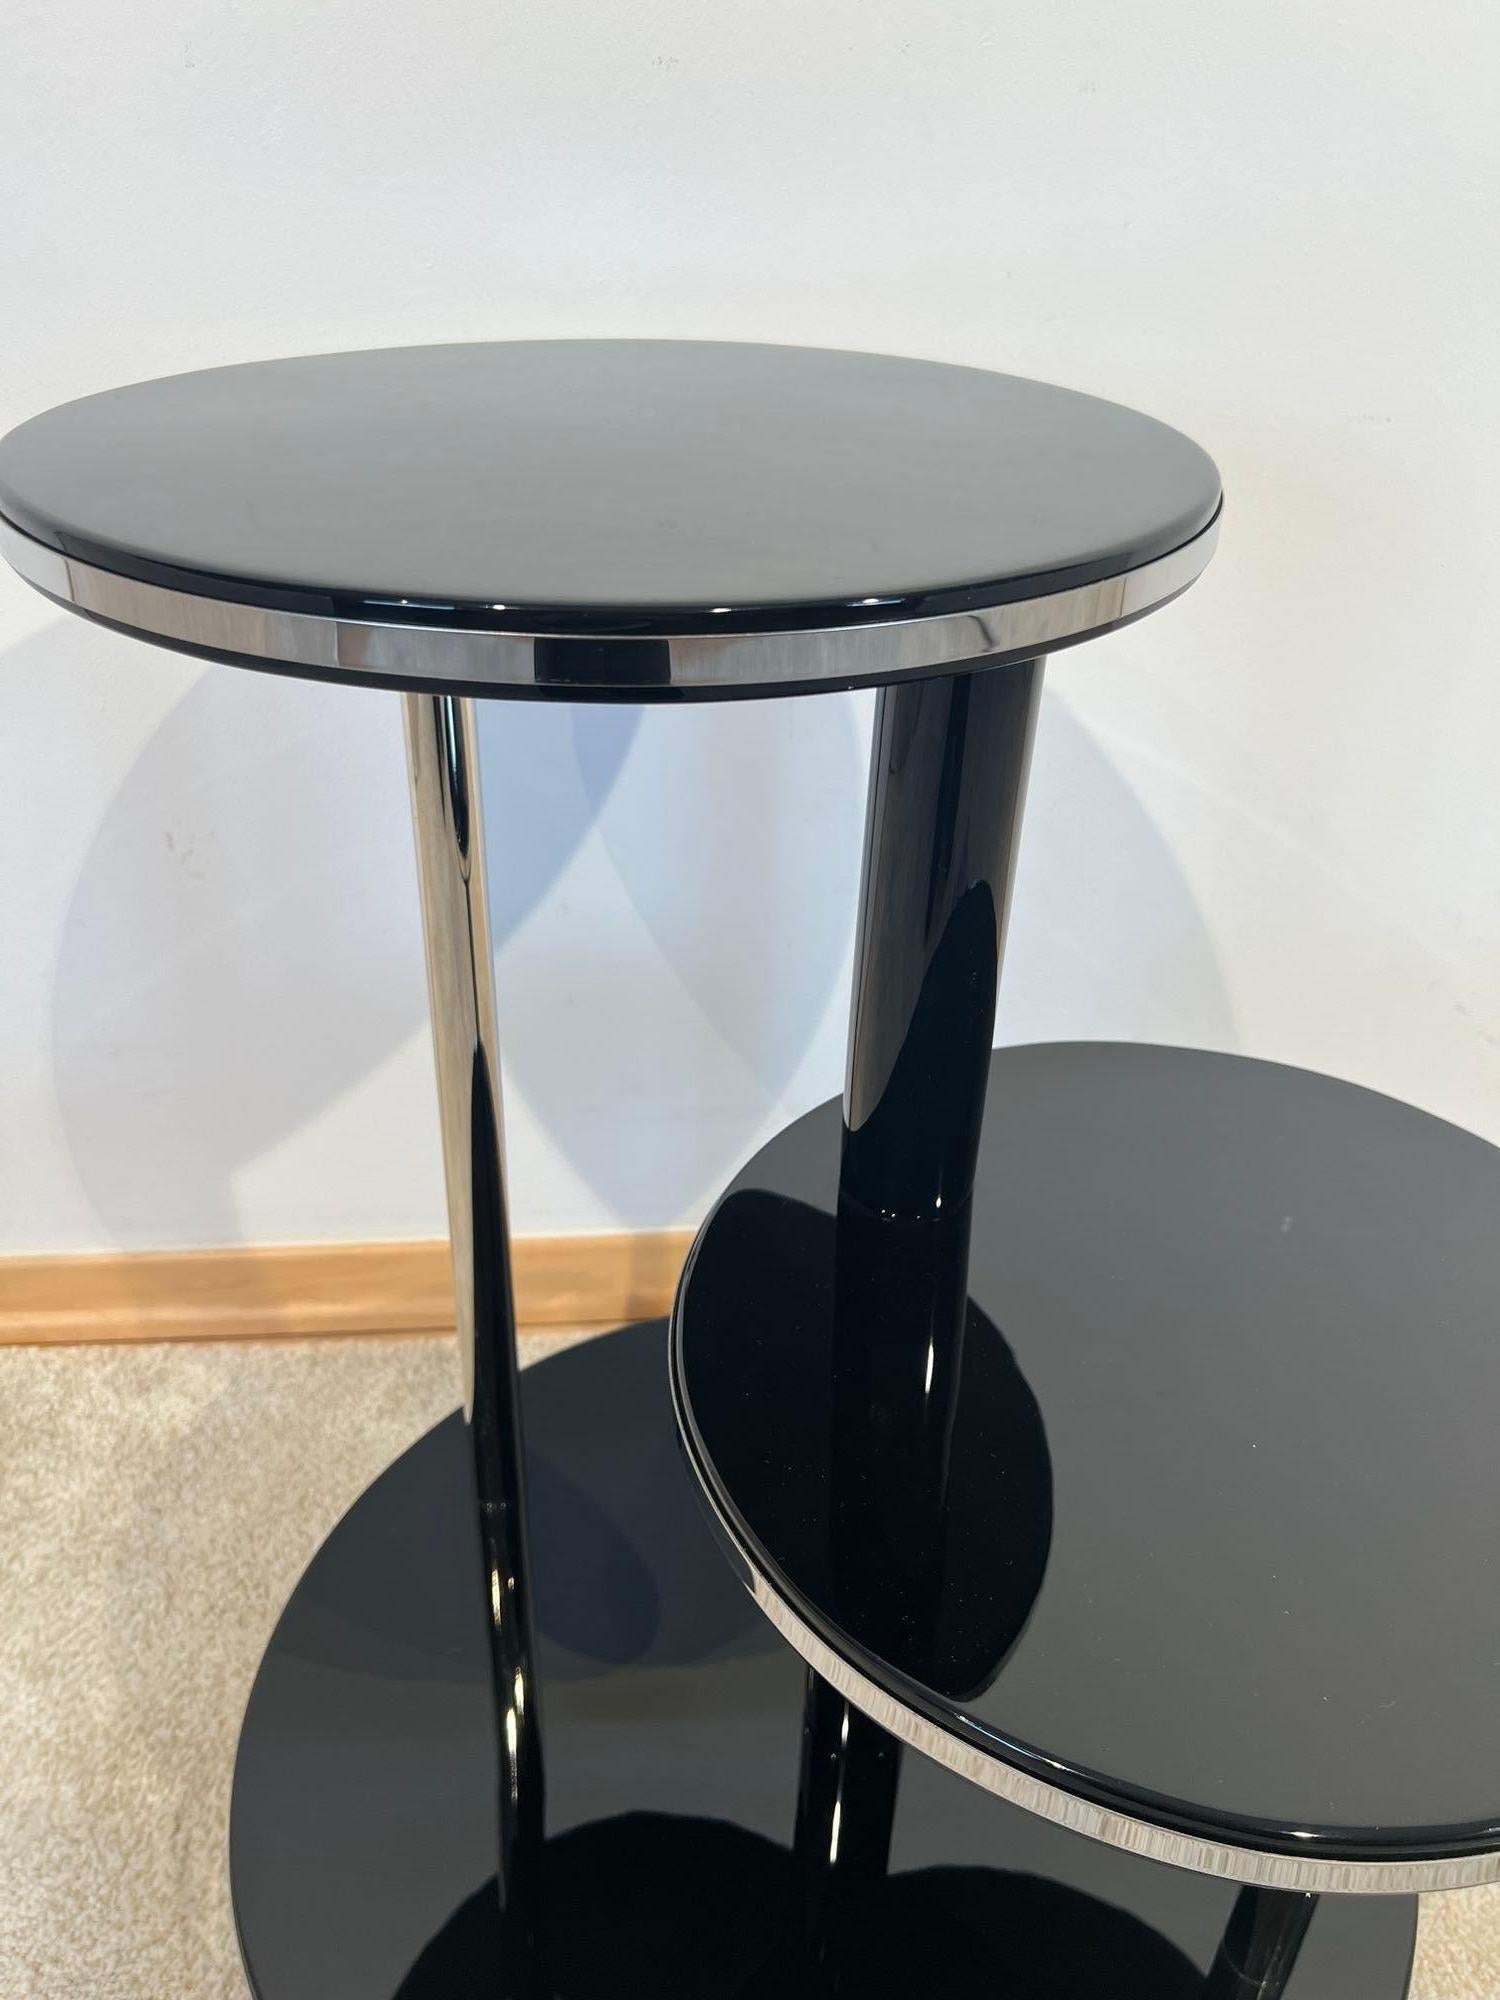 Round Art Deco side table, flower stand or three-tier etagere table
Black piano lacquer on wood, lacquered and polished to a high gloss. Two vertical chrome-plated metal rods and a black painted stele in the middle. All three levels have a stainless